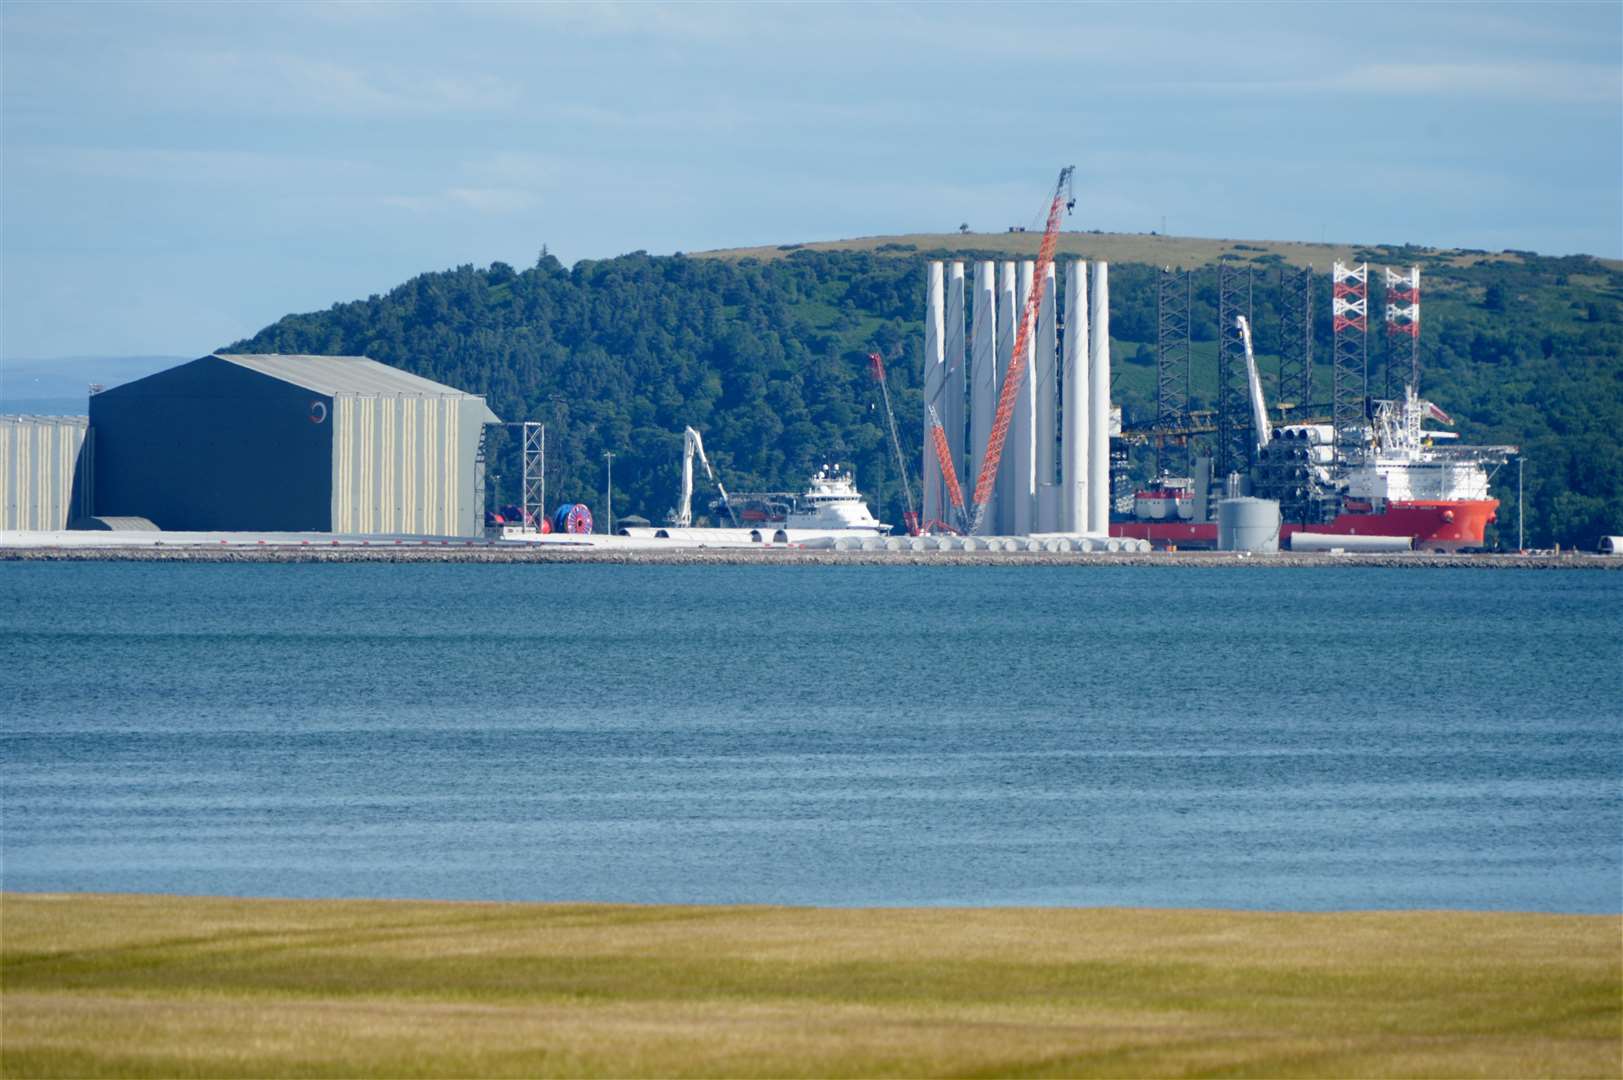 Giant wind turbines for the Beatrice offshore wind farms being unloaded at Nigg Energy Park.